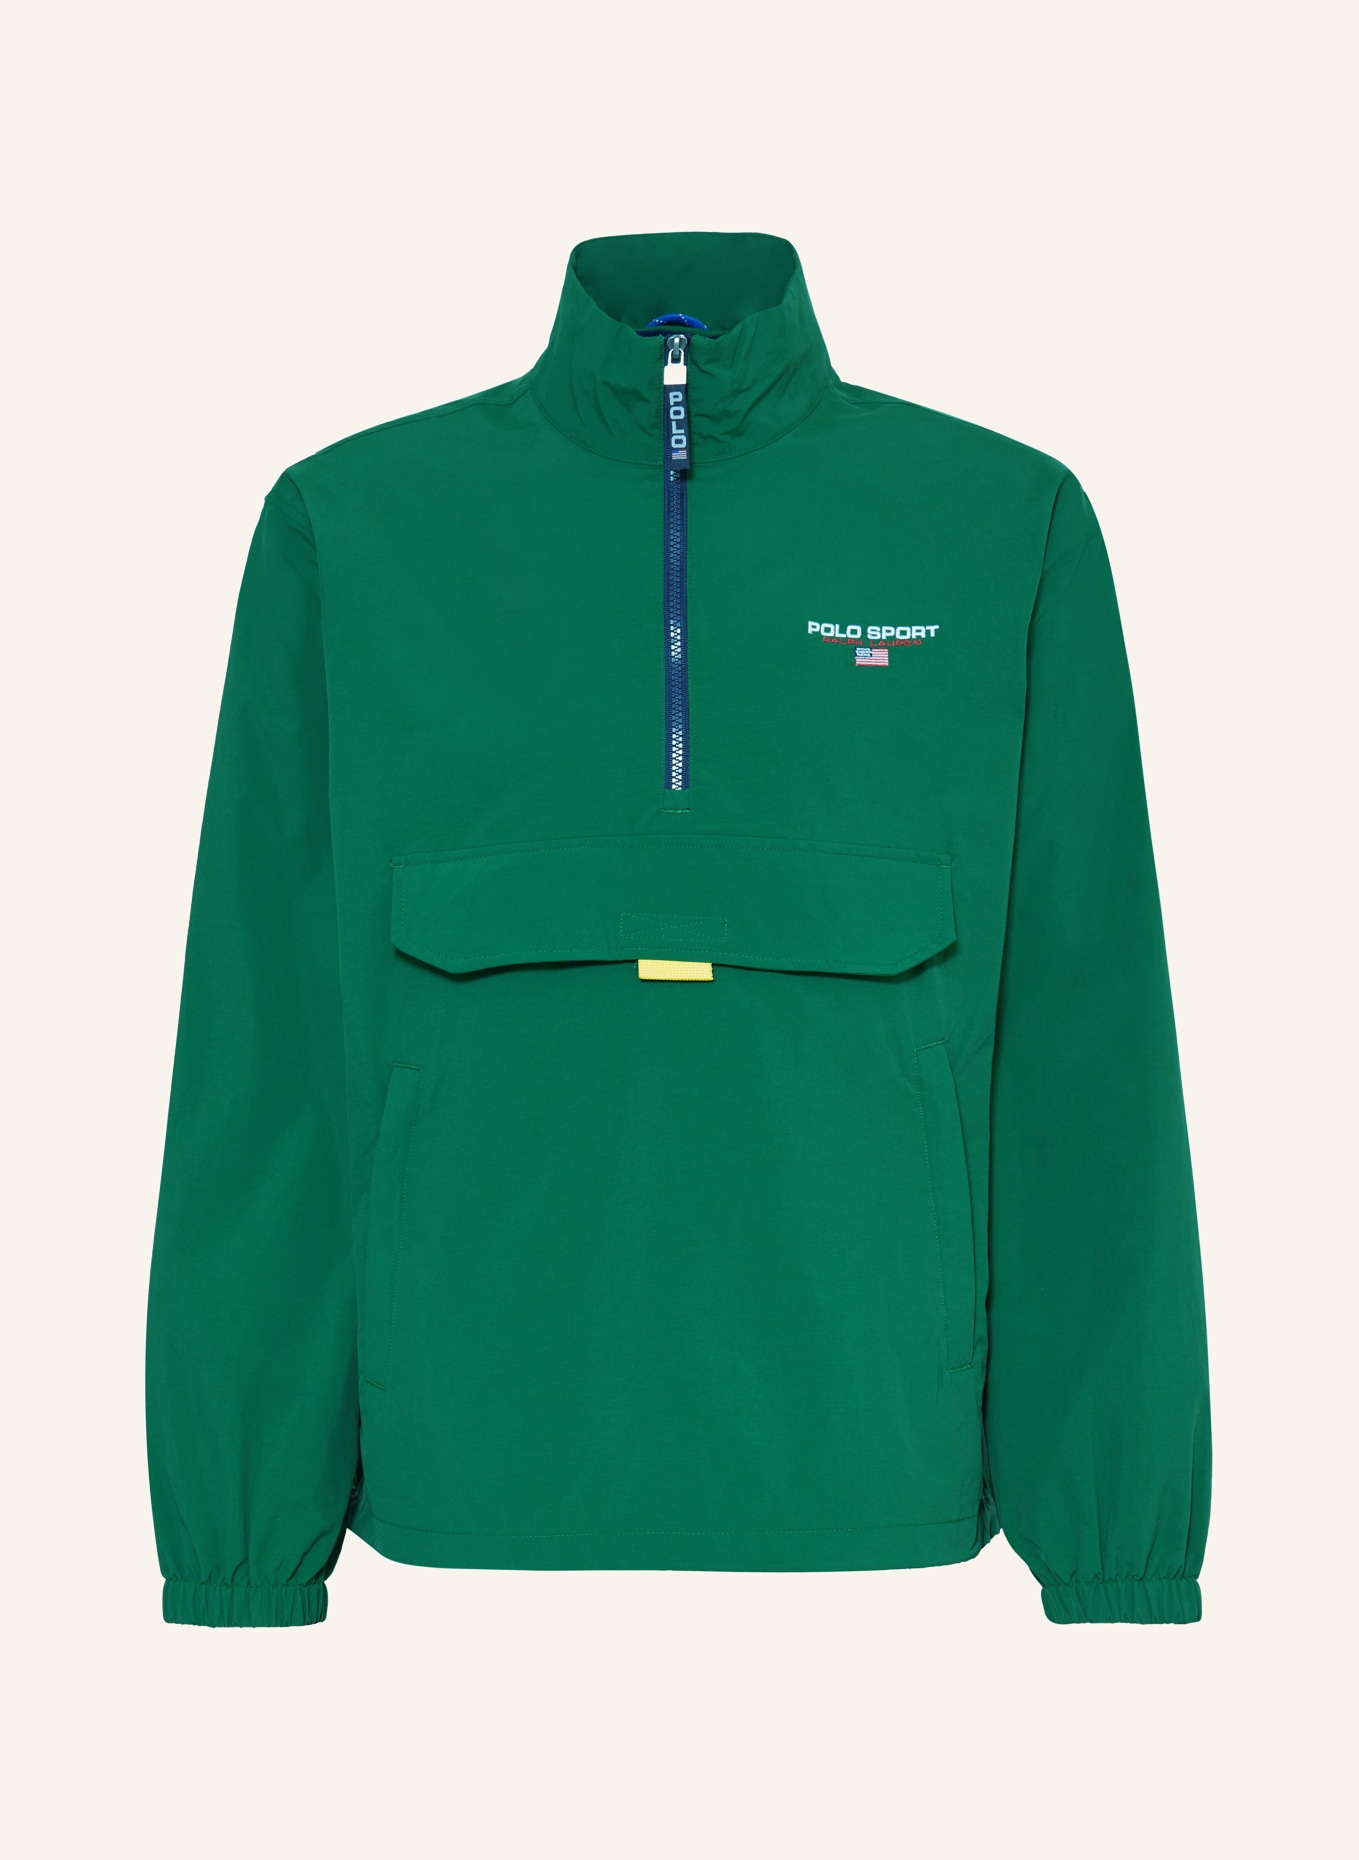 POLO SPORT Anorak jacket, Color: GREEN (Image 1)